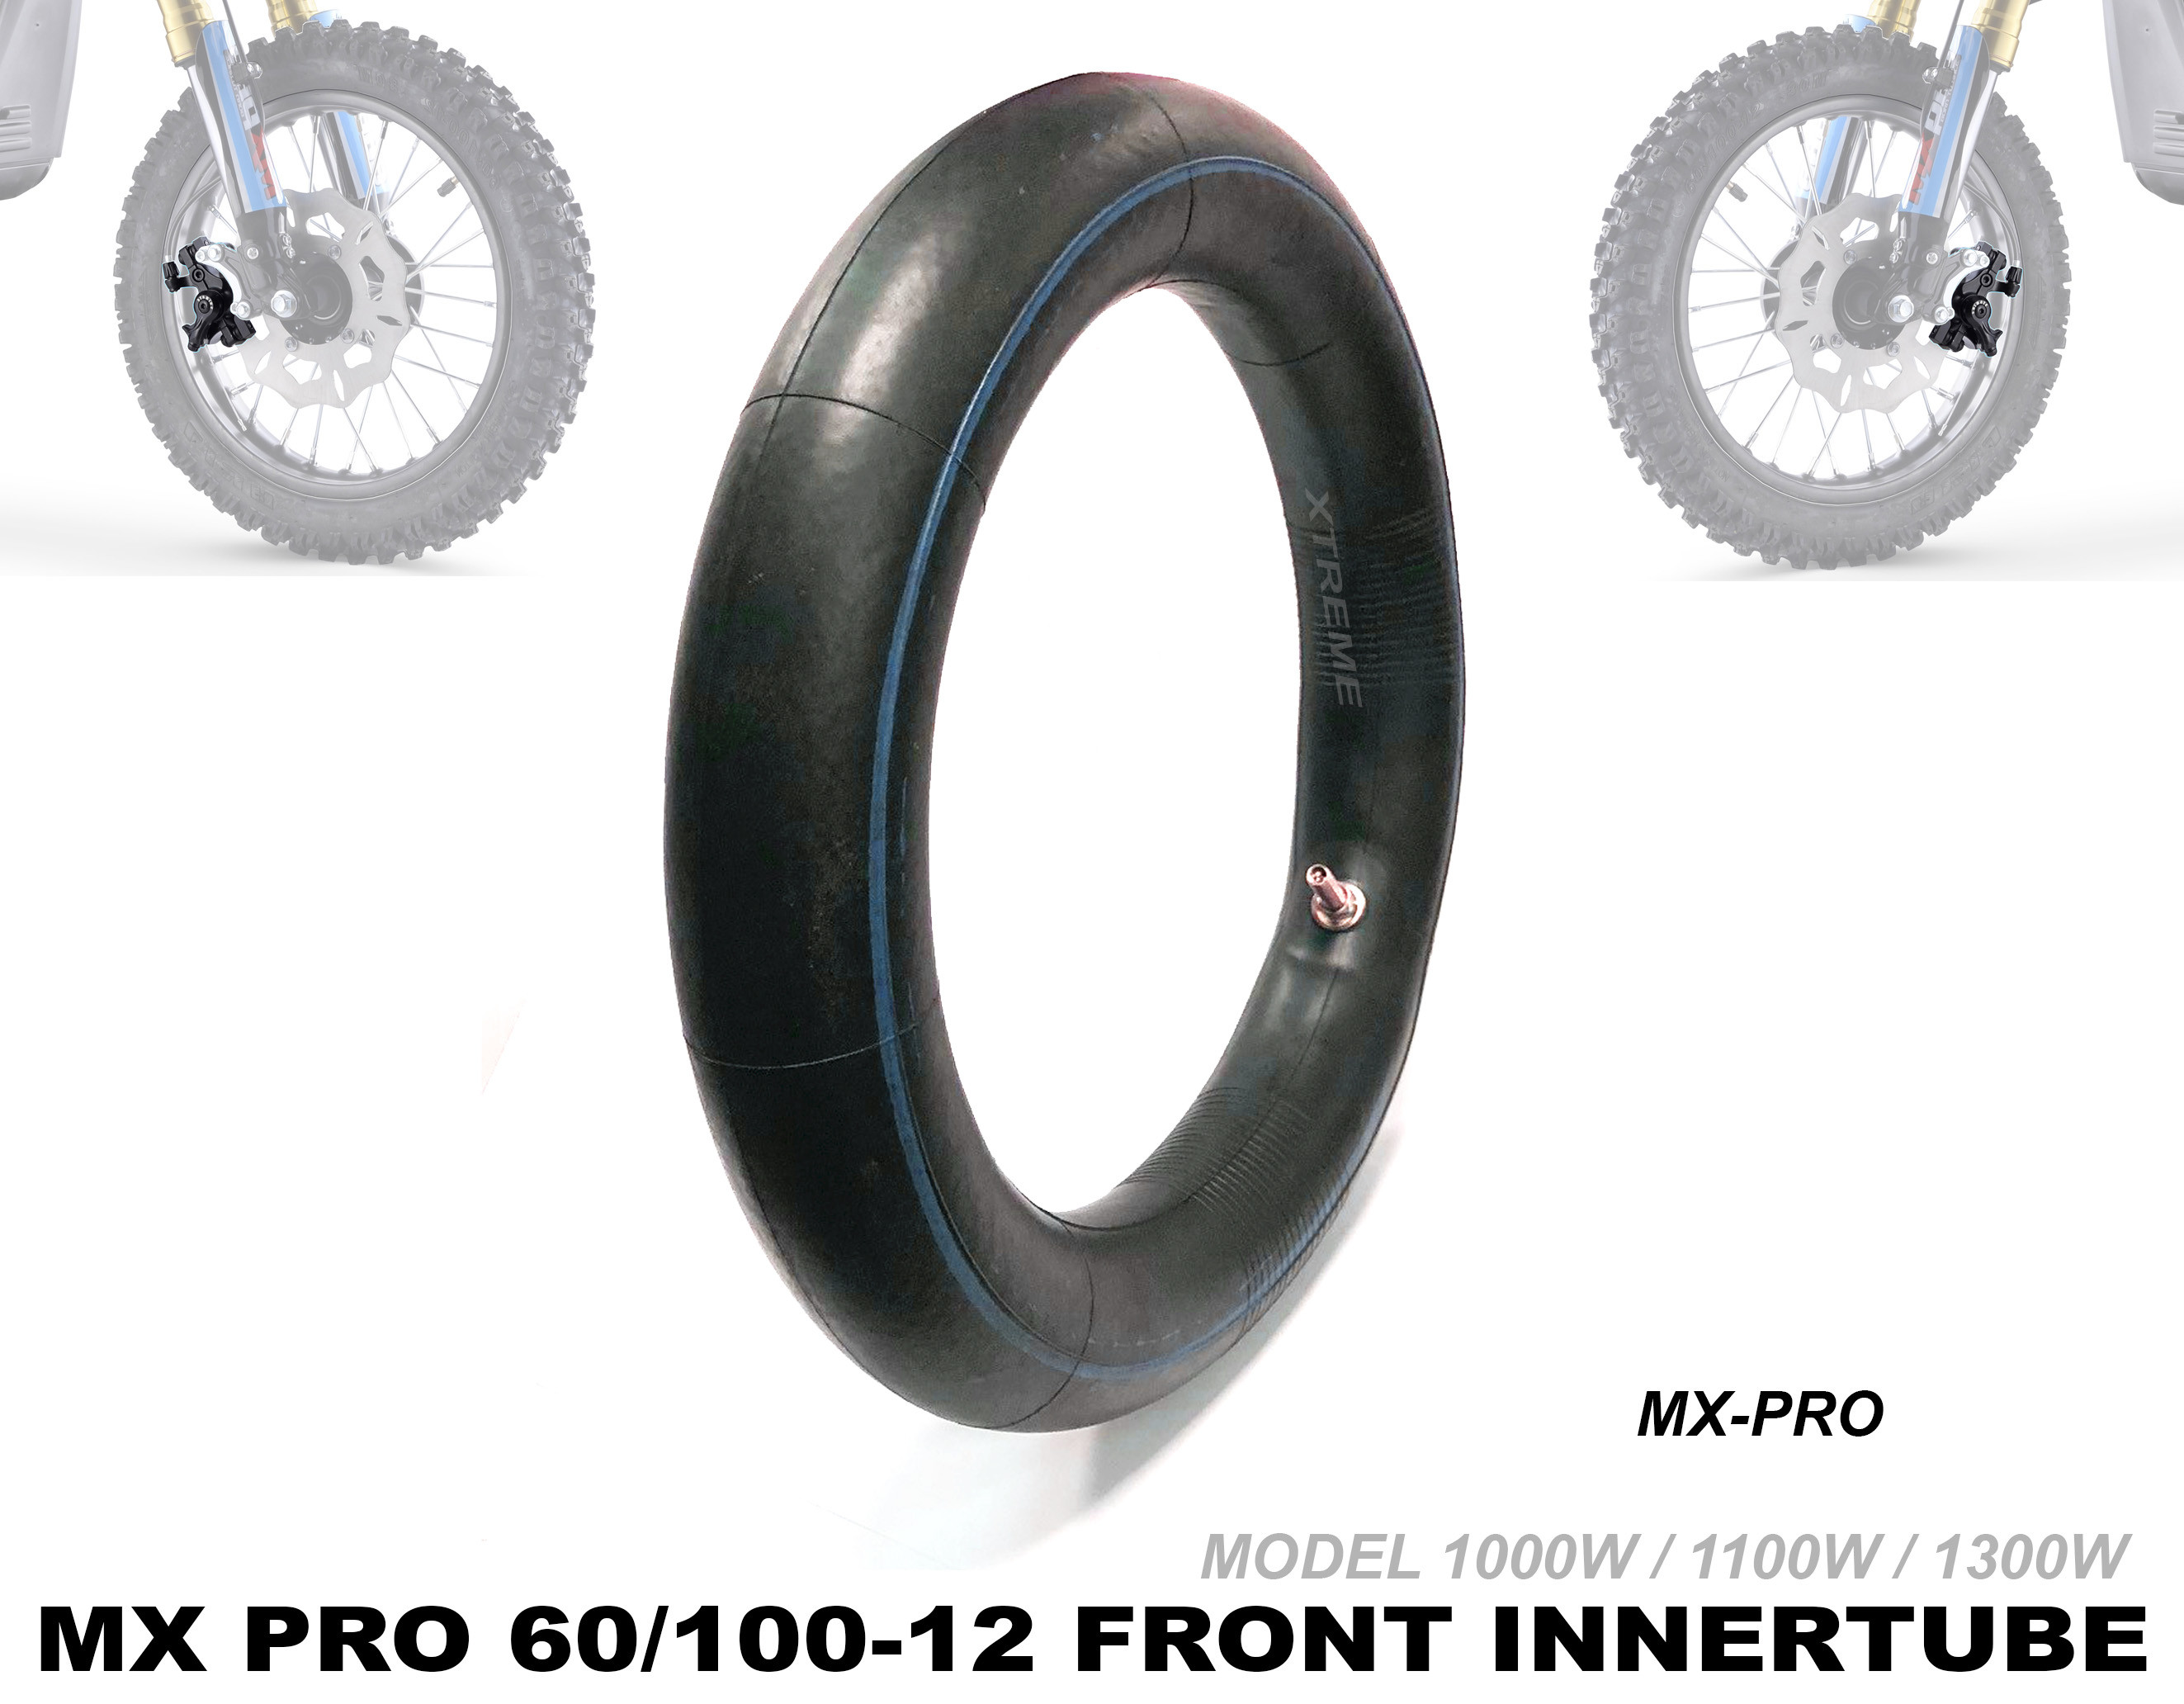 XTREME ELECTRIC XTM MX-PRO 36V REPLACEMENT FRONT INNER TUBE 250/2.75-12 